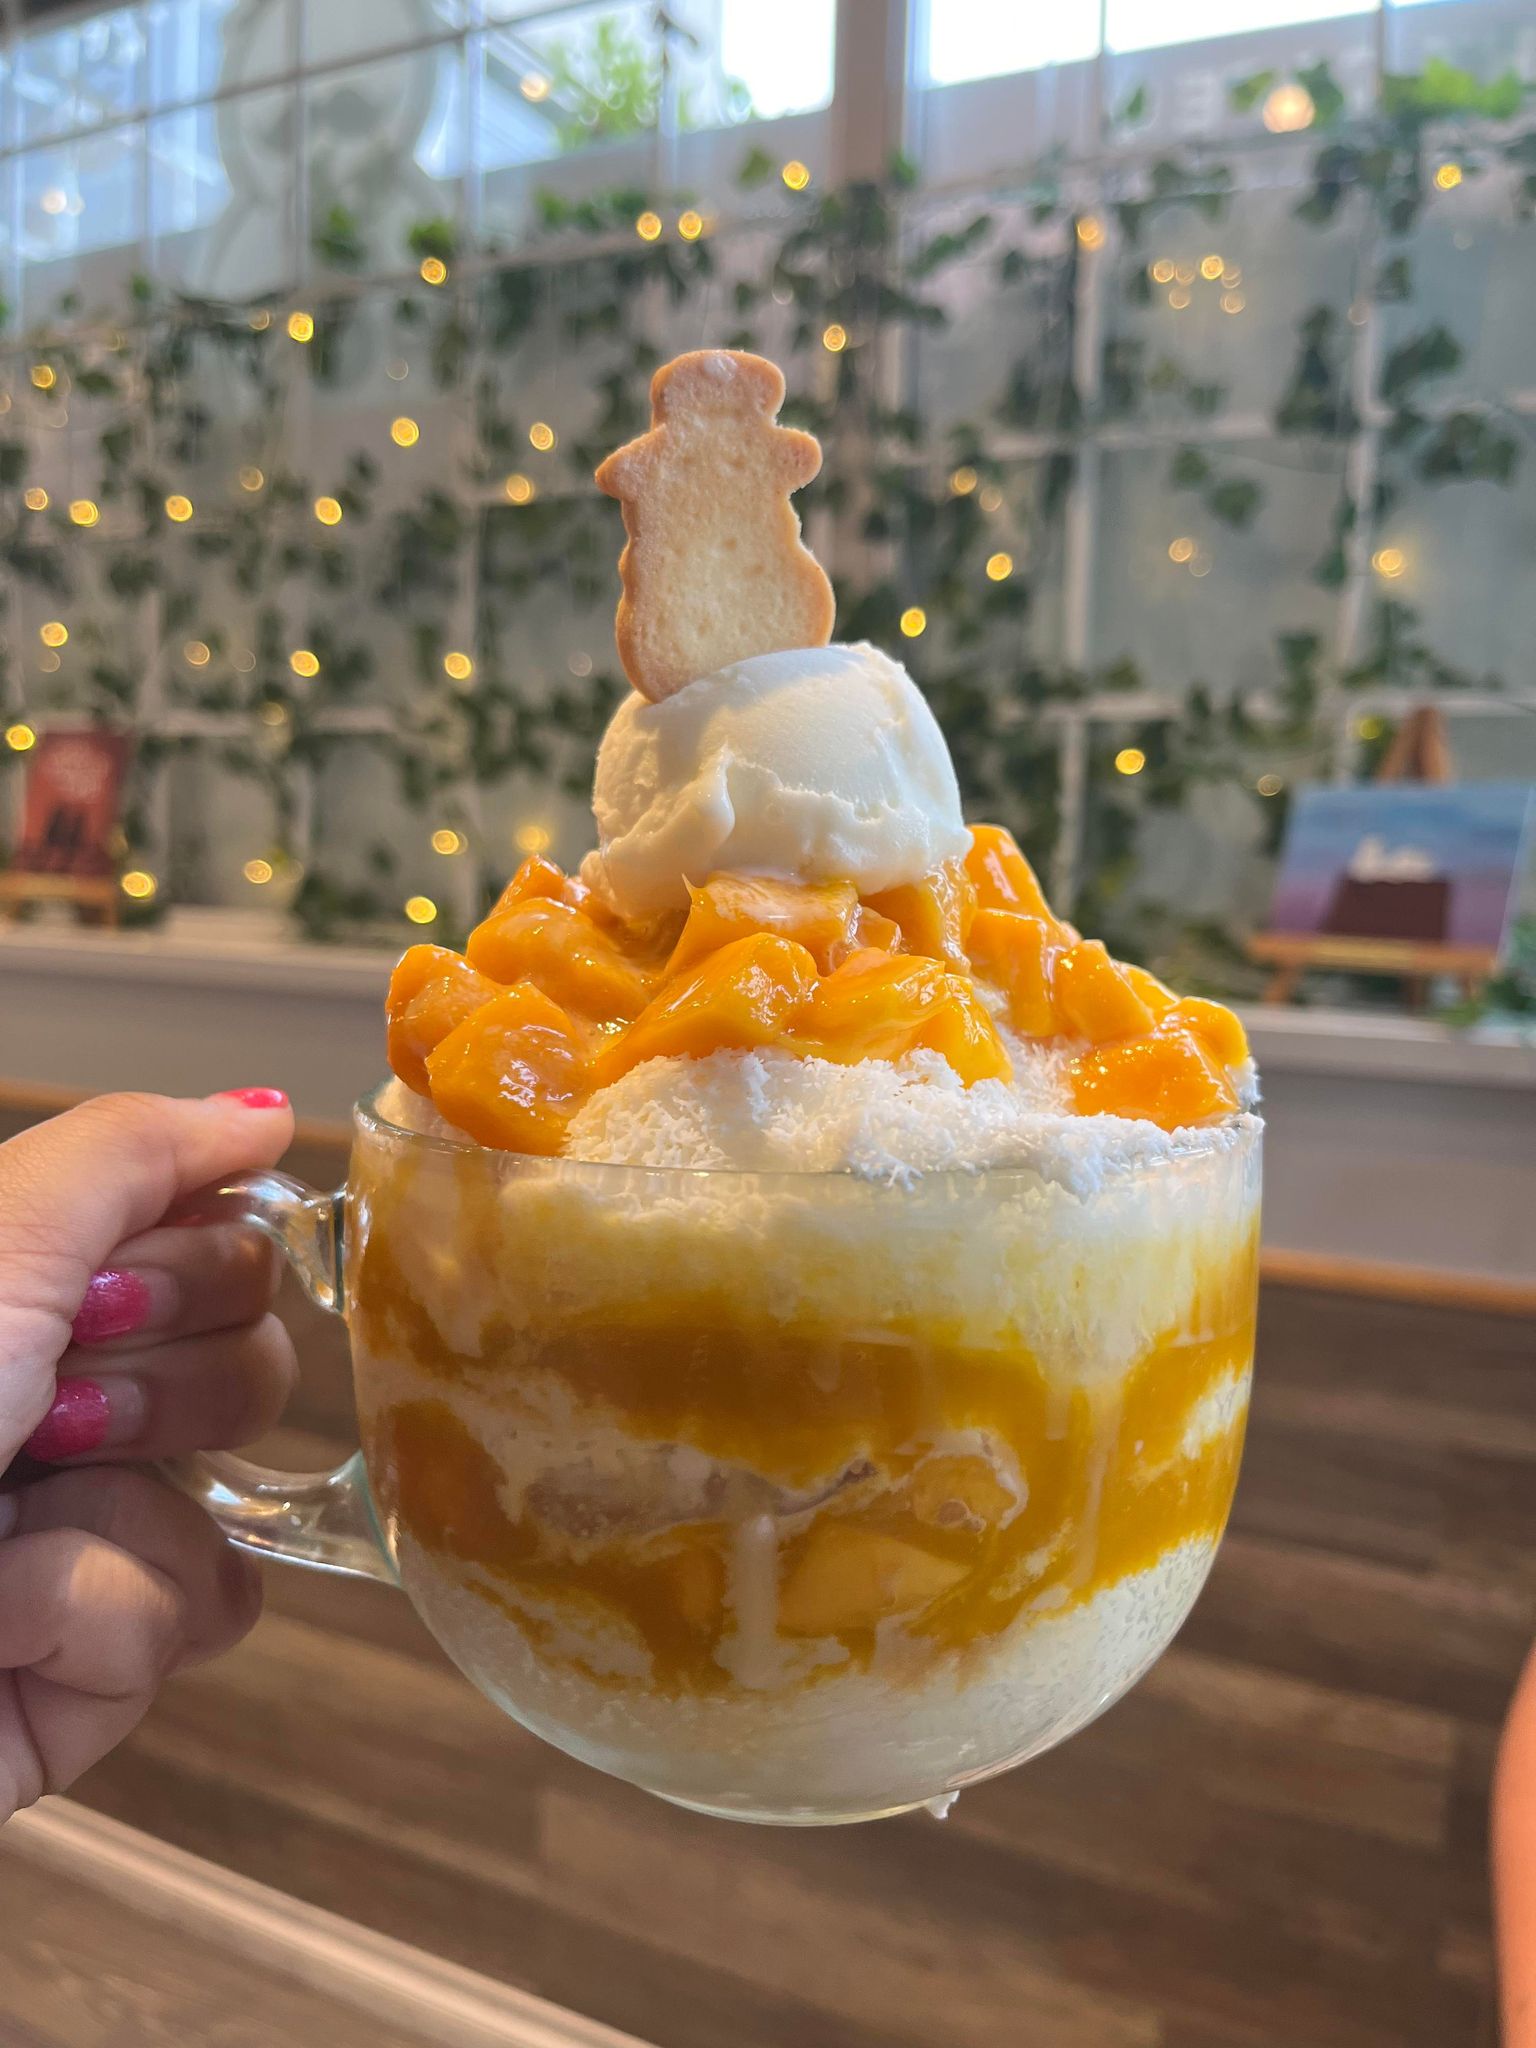 A clear glass of shaved ice topped with mango, a scoop of ice cream, and a cookie held up in front of a wall with greenery and string lights.